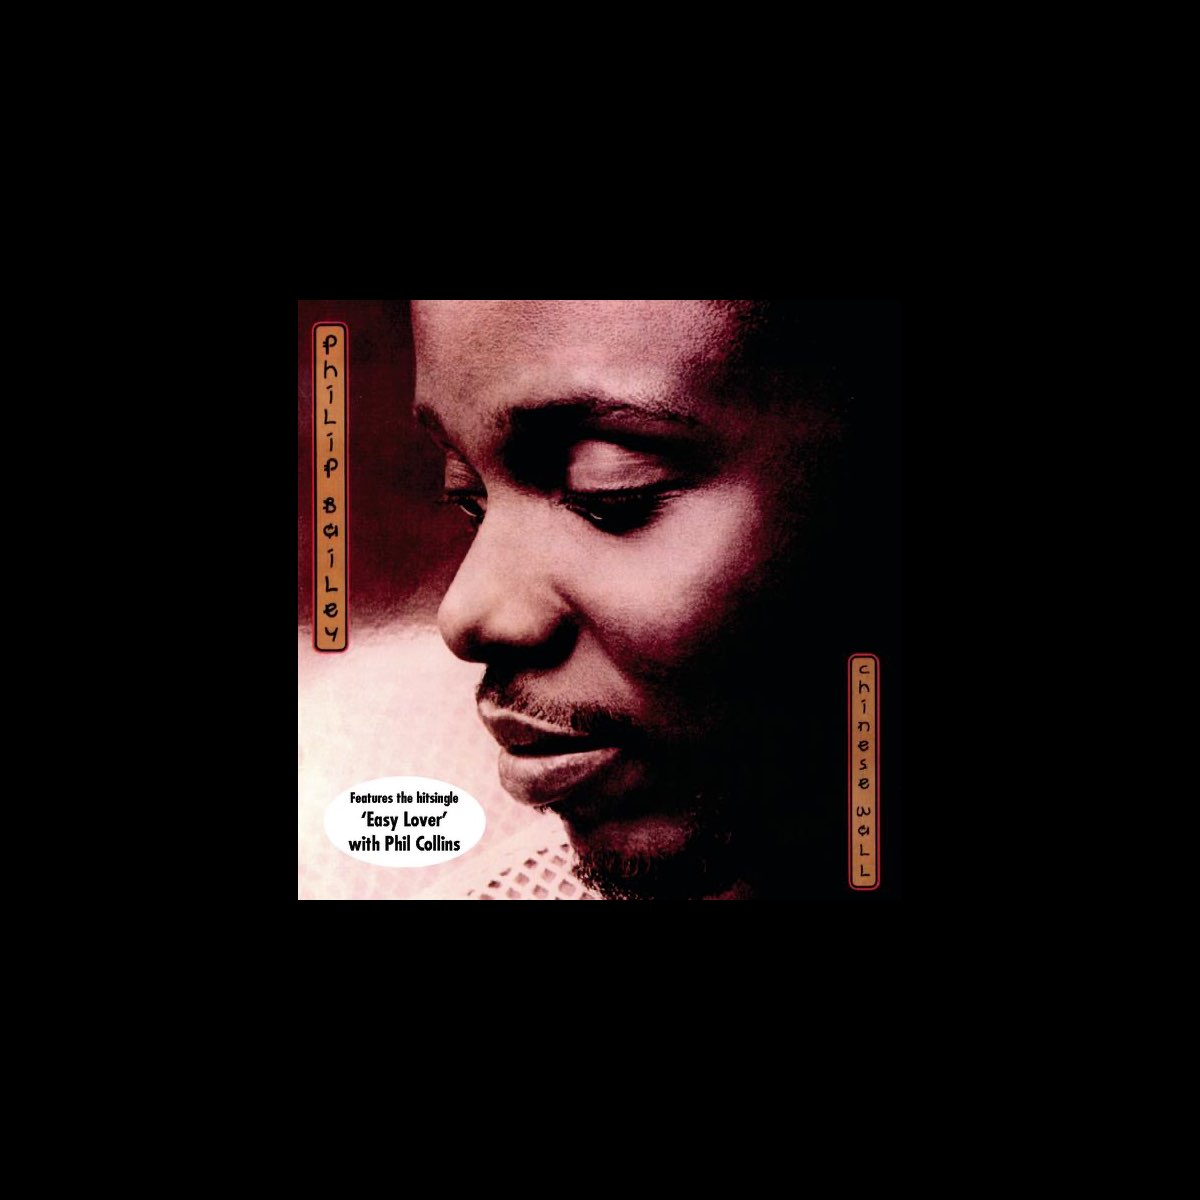 Chinese Wall - Album by Philip Bailey - Apple Music